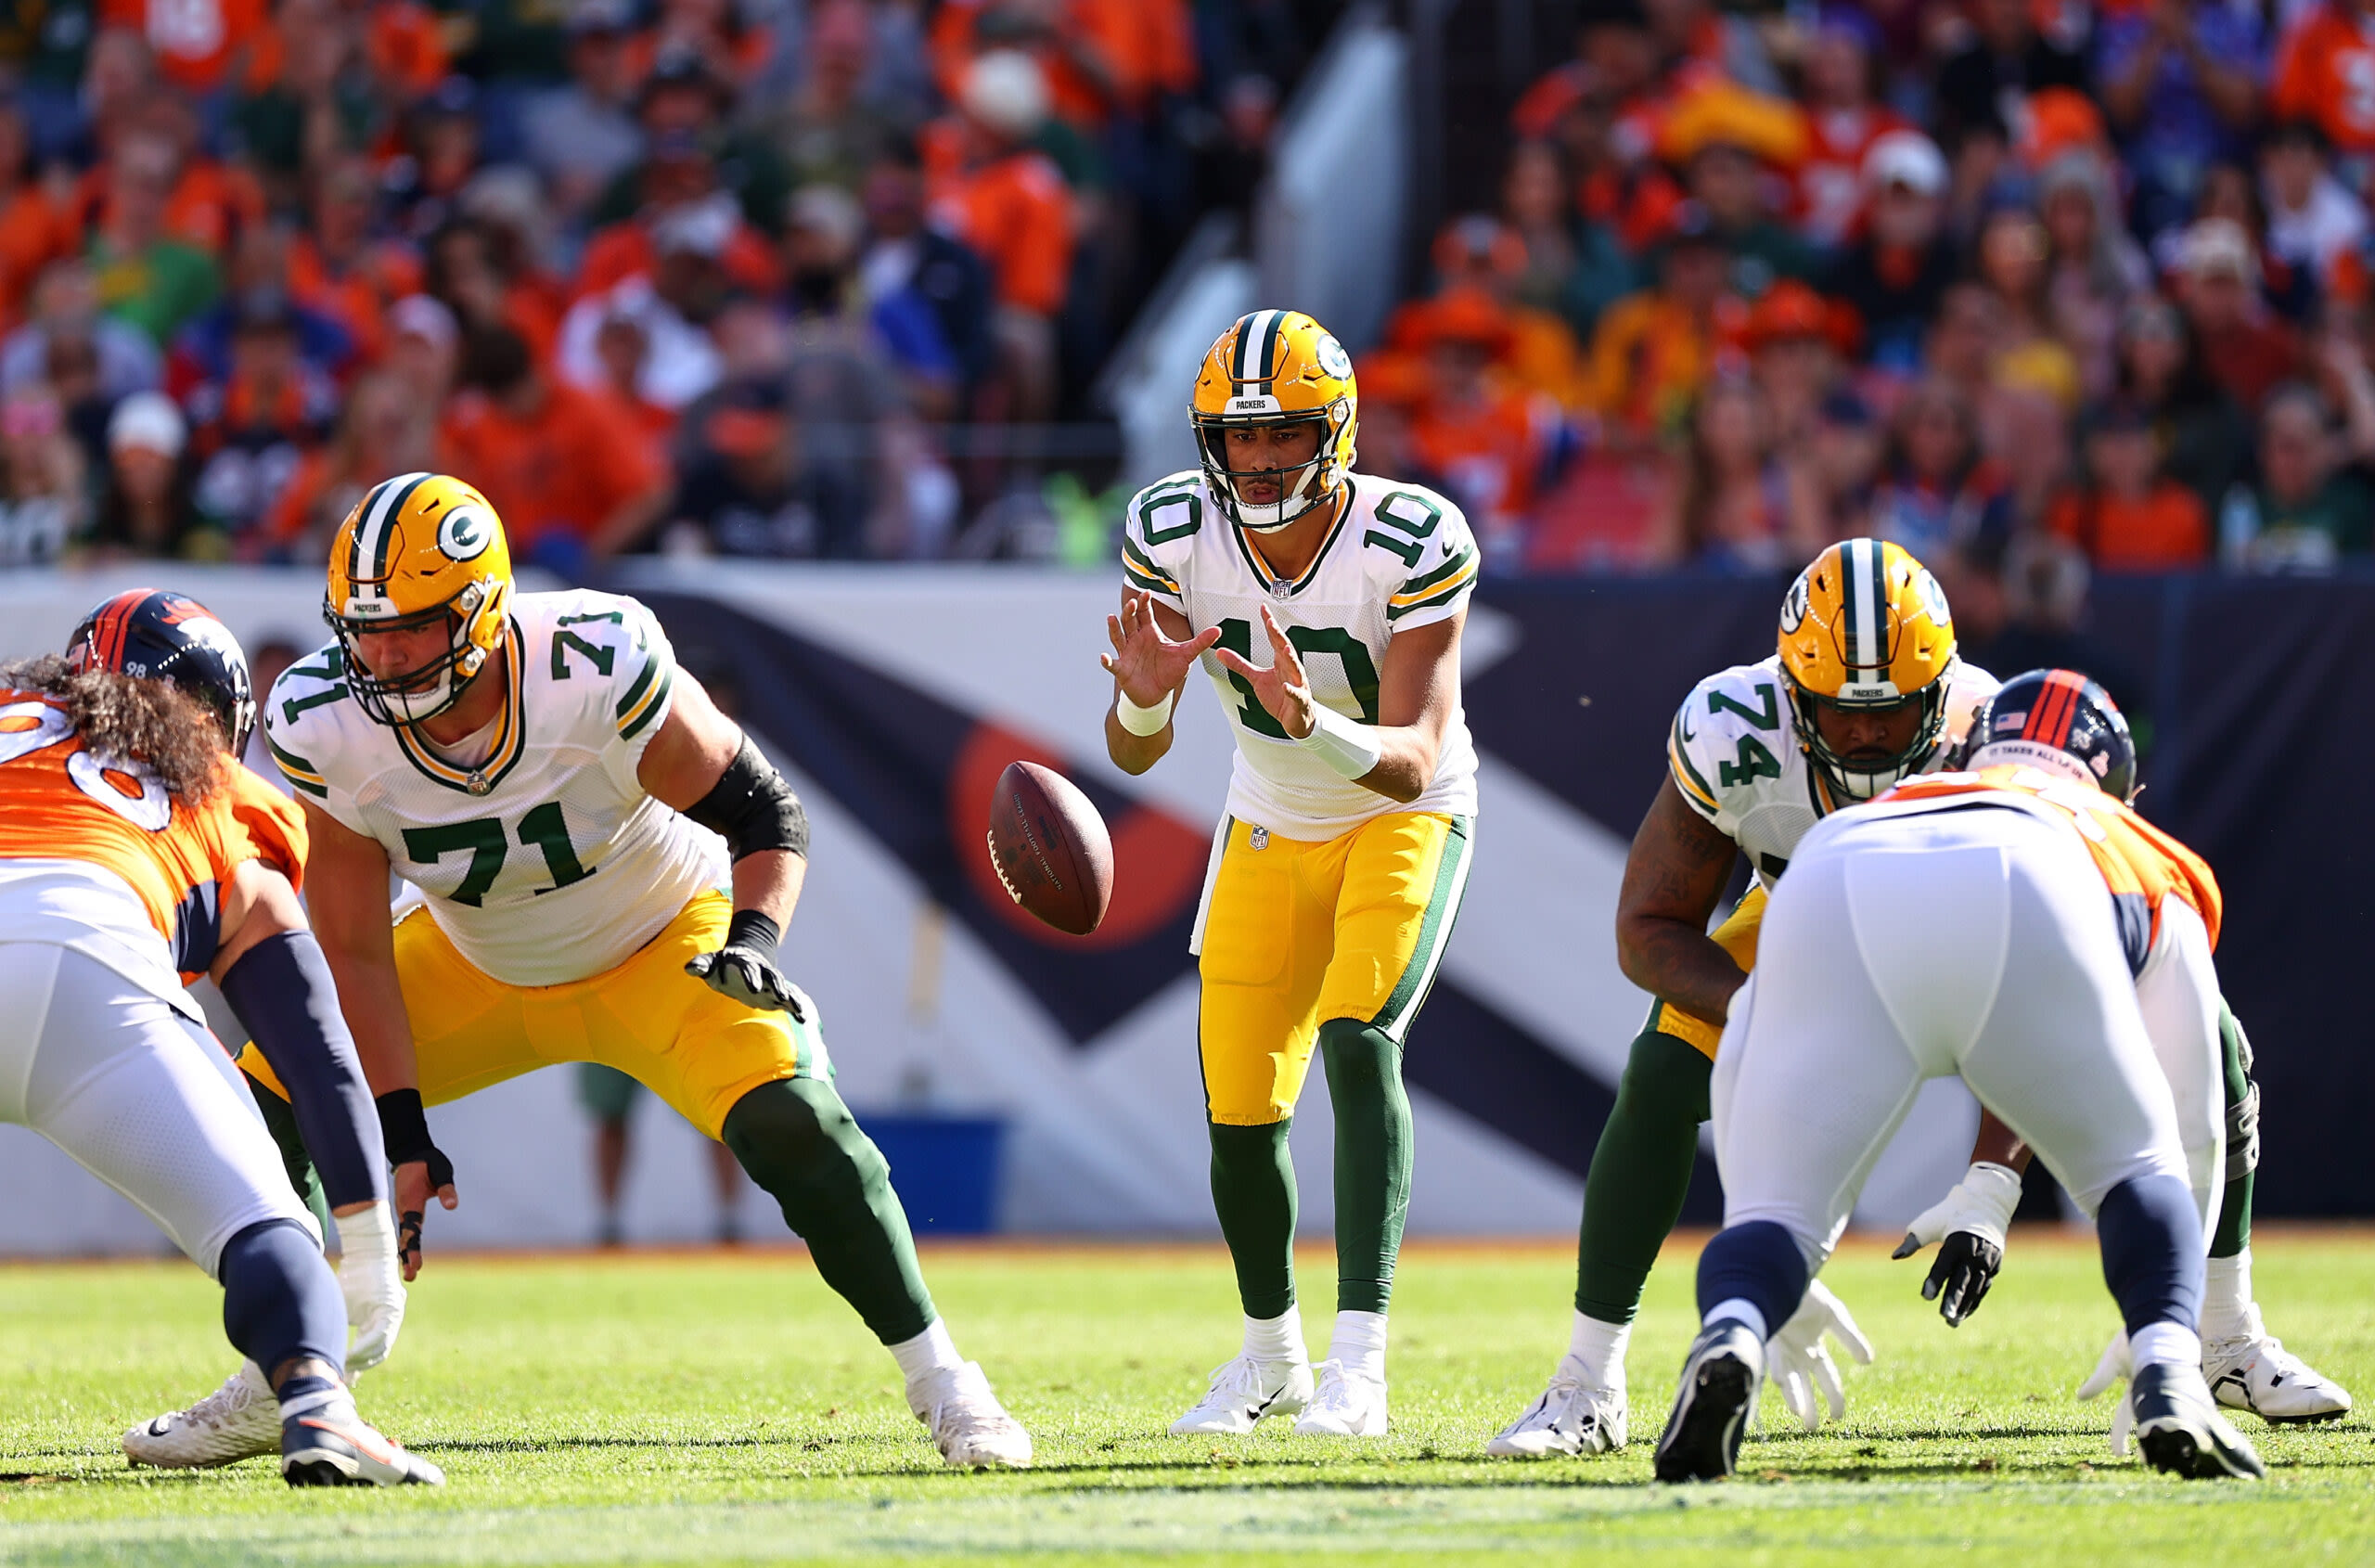 NFL Network to broadcast Packers-Broncos preseason game